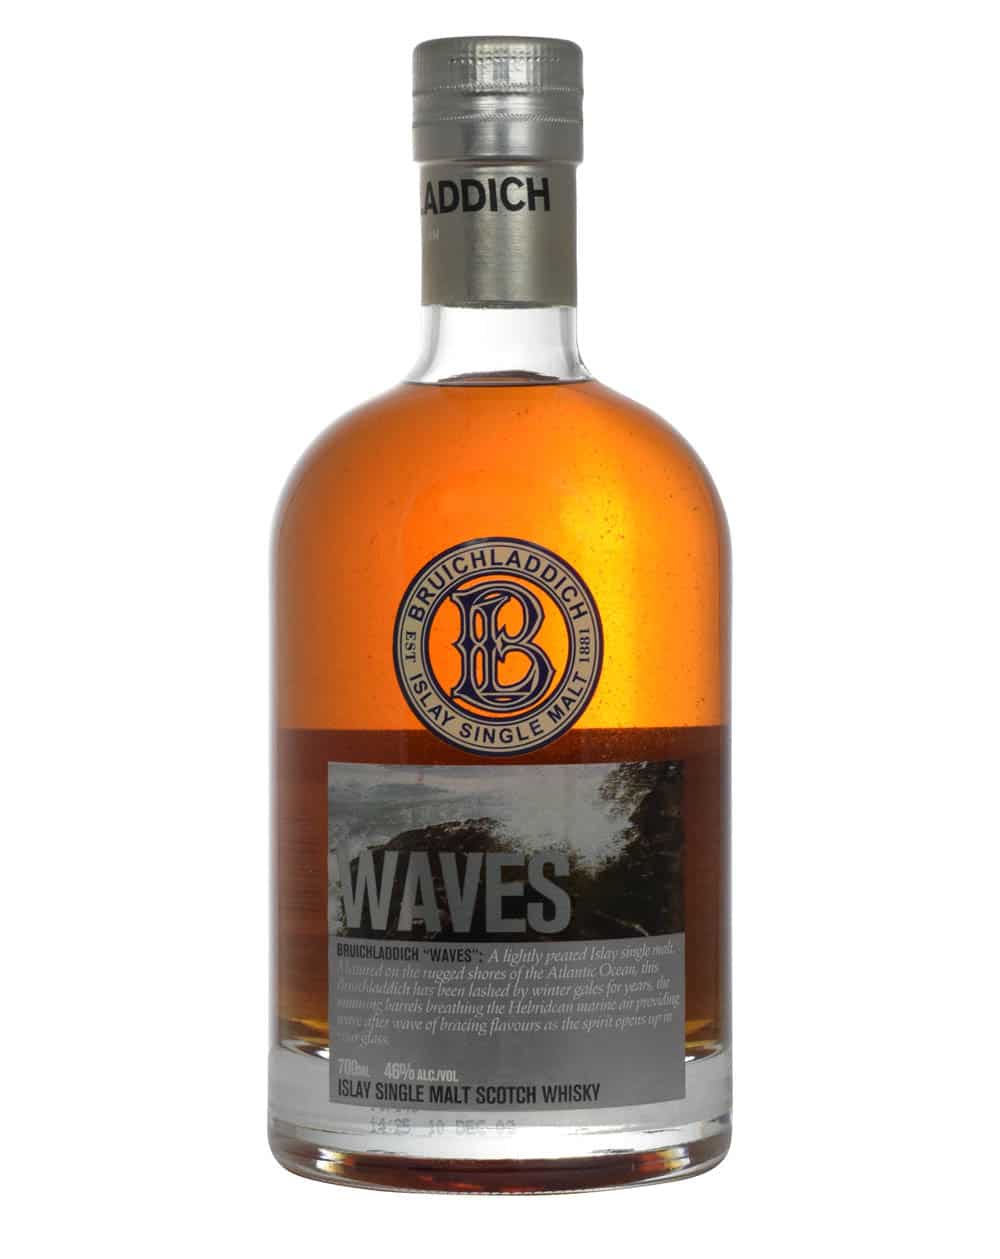 Bruichladdich Waves Second Edition 2009 Must Have Malts MHM